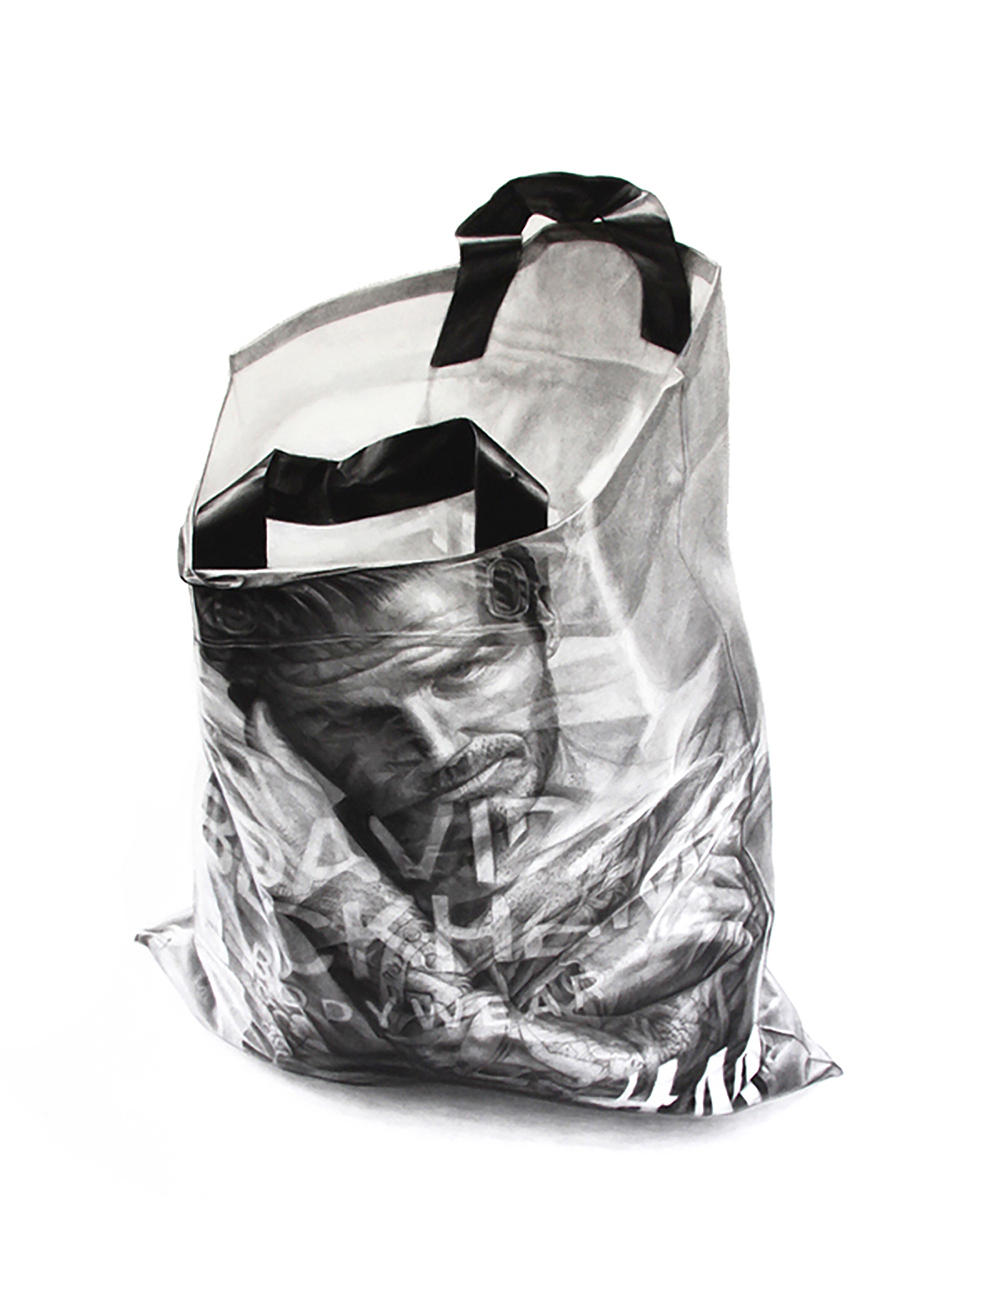 Charcoal drawing of a bag with David Beckham